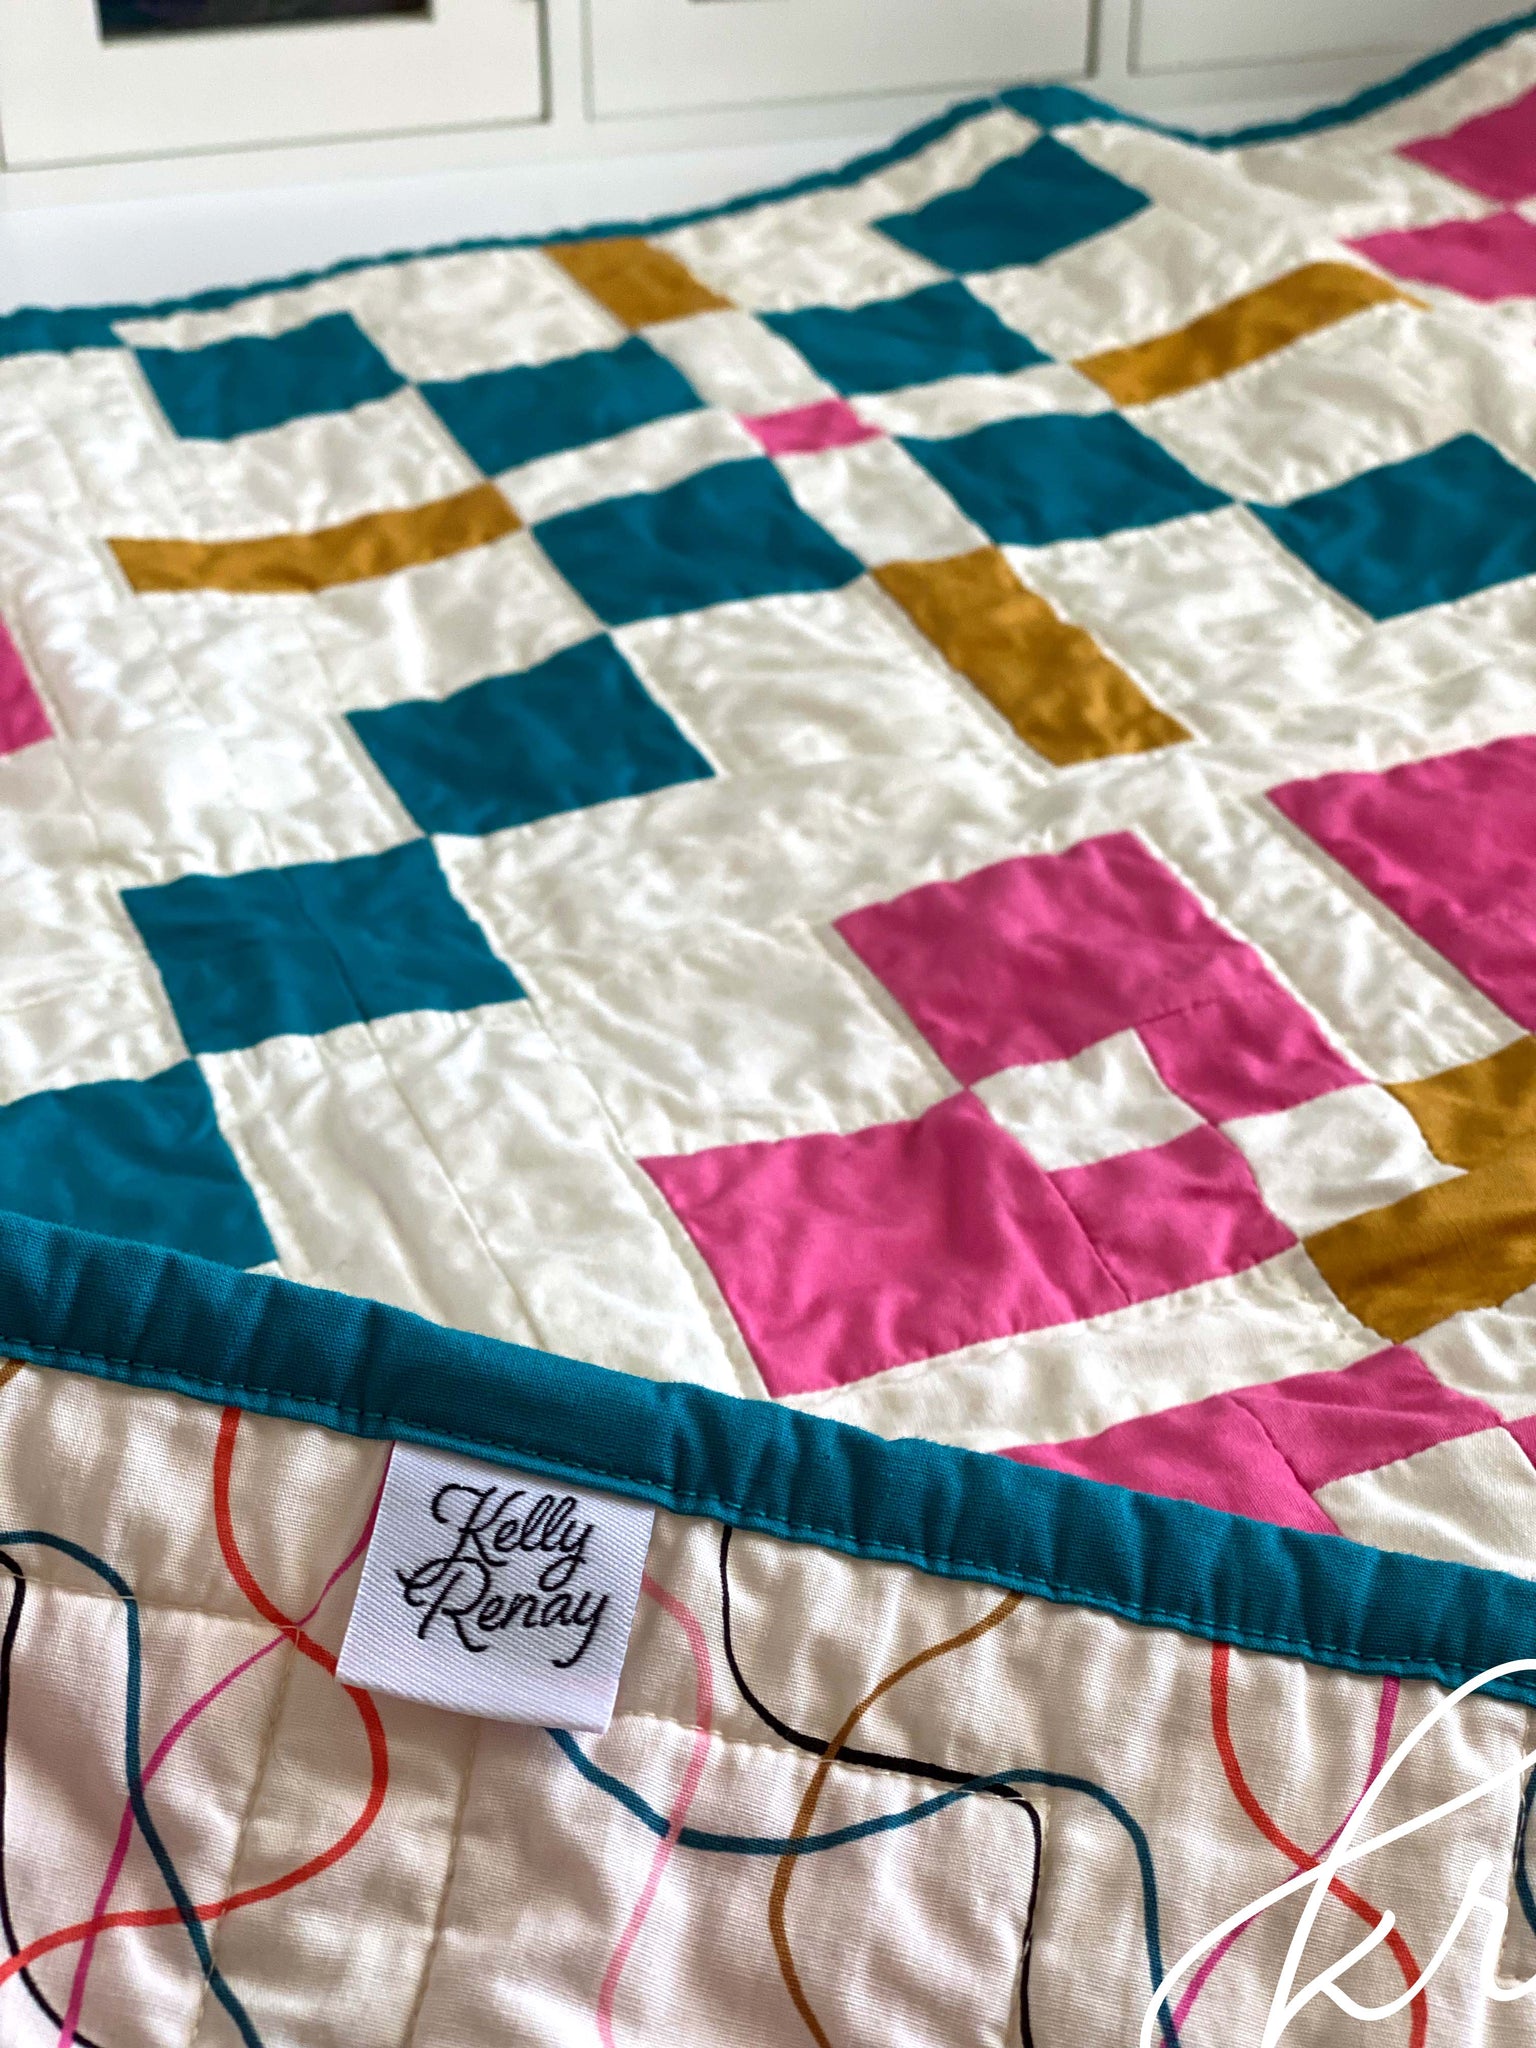 Nanette Quilt with Kelly Renay label